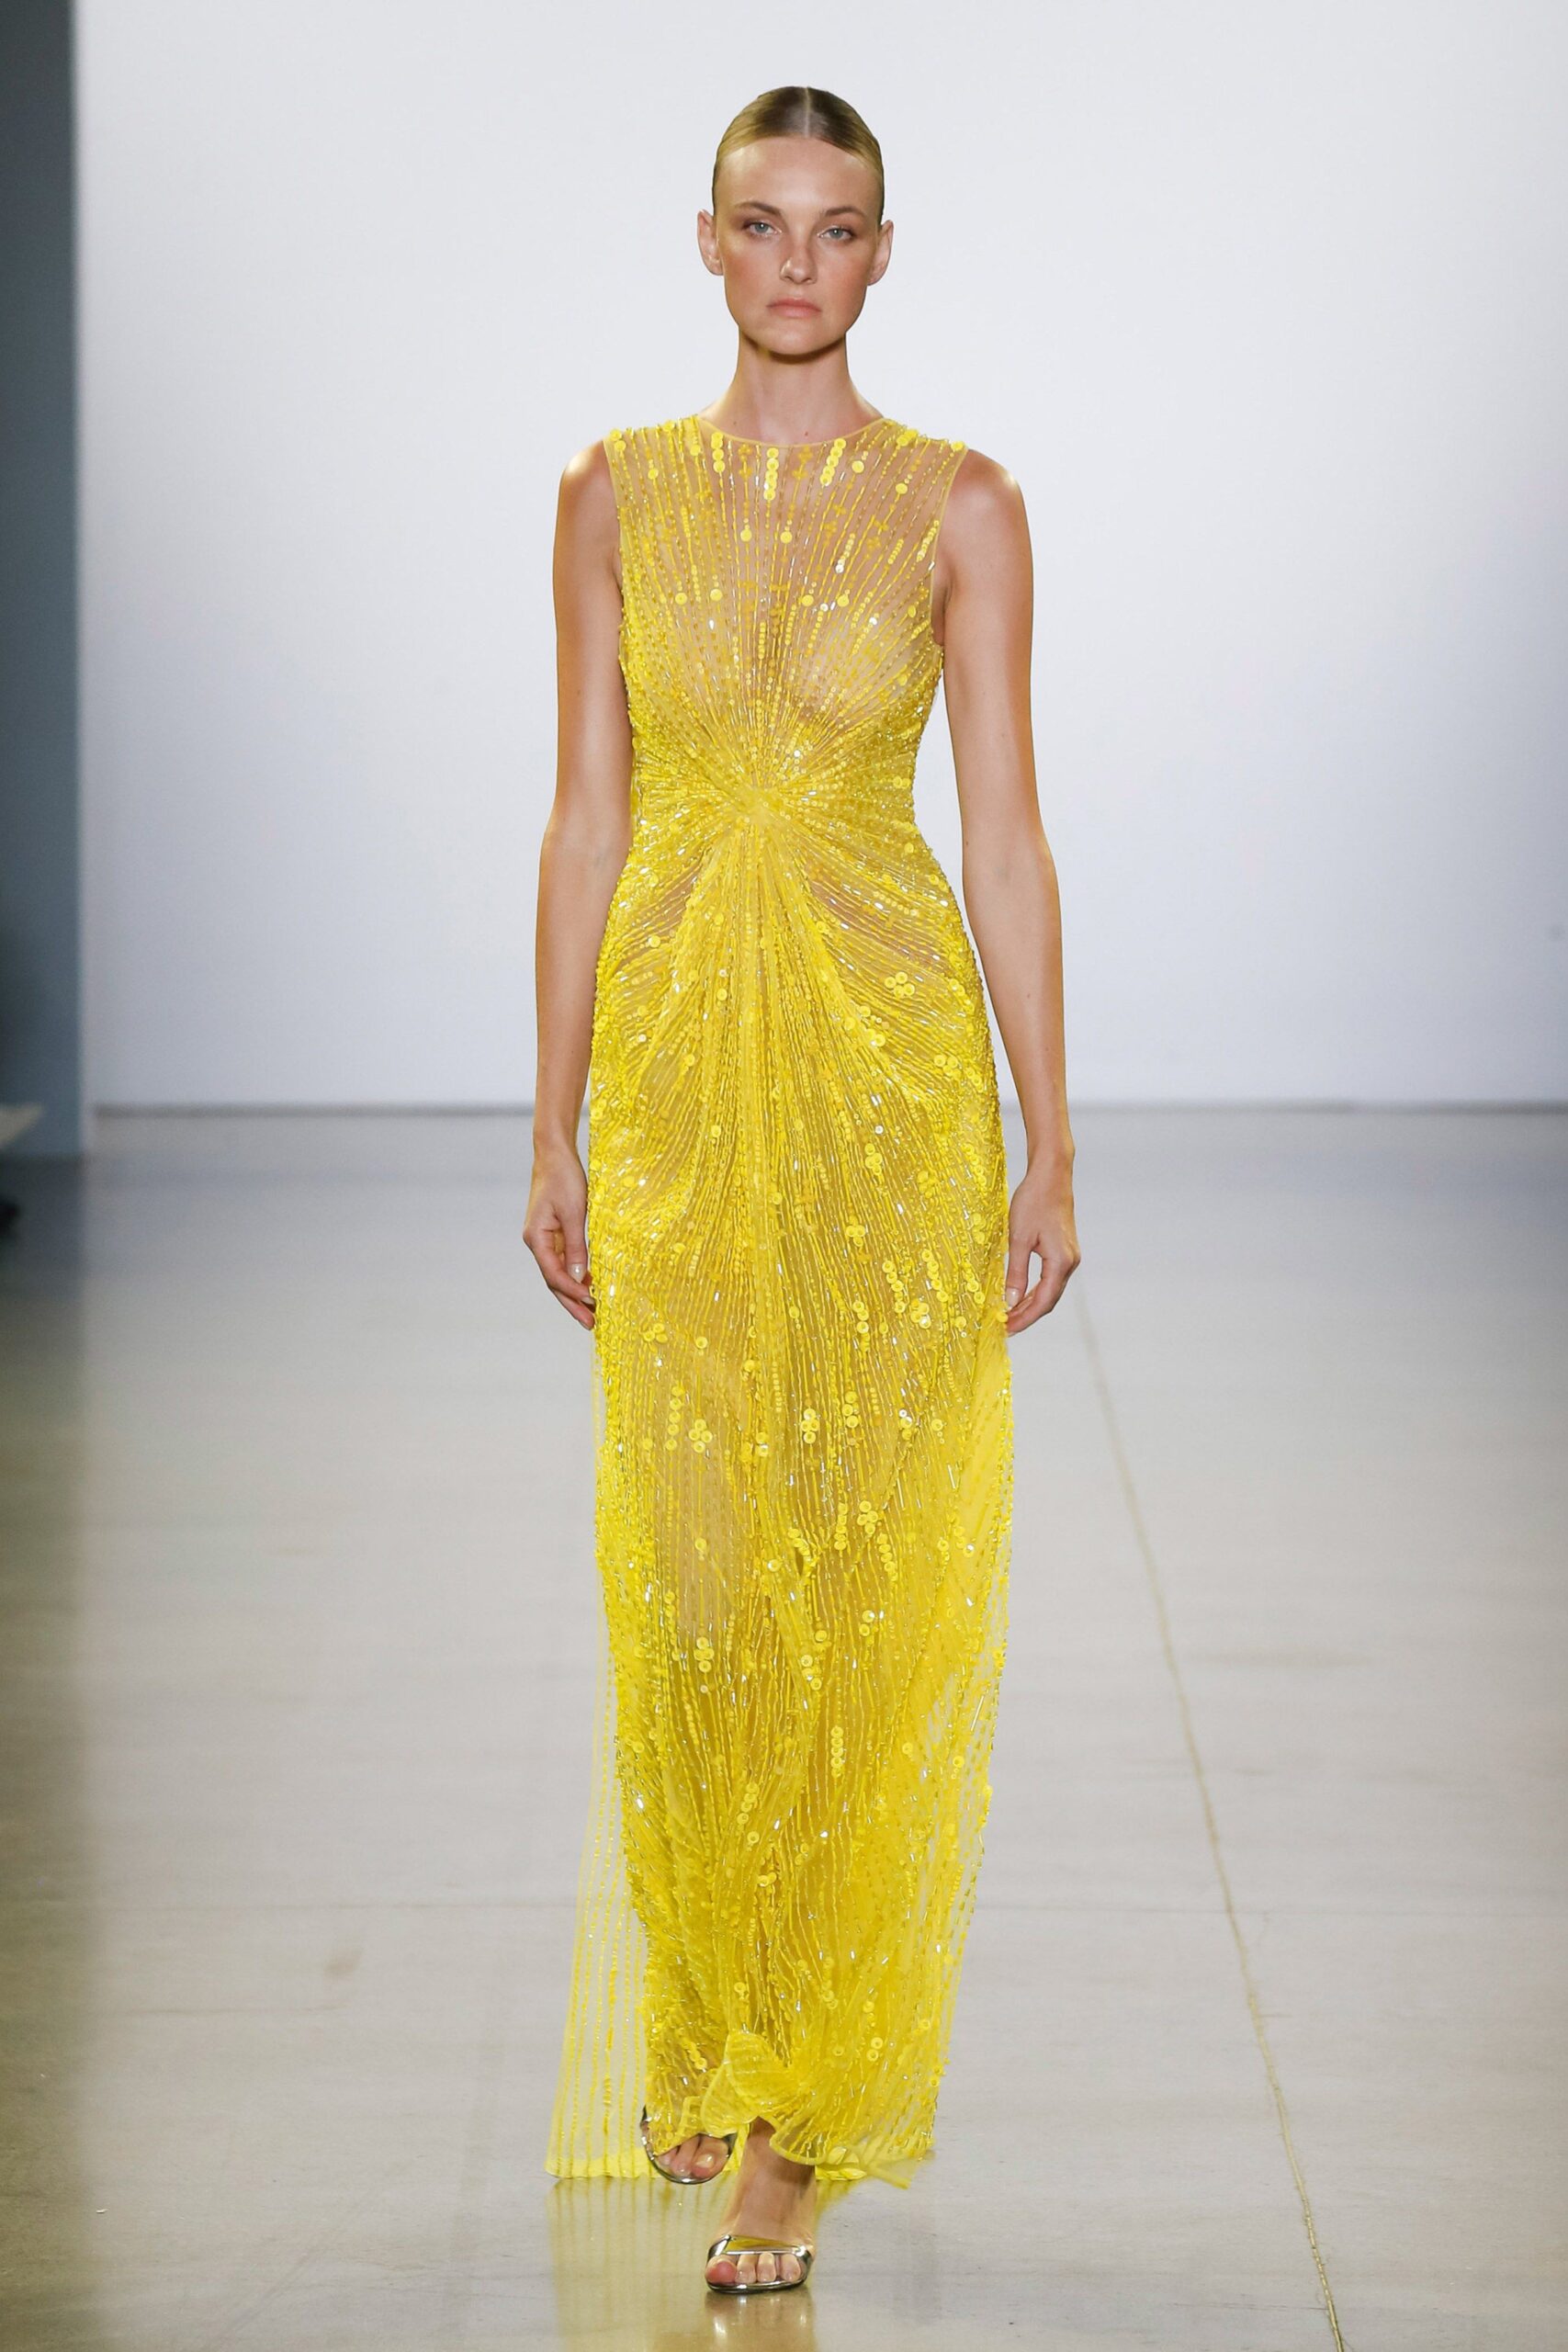 Yellow Dress: Injecting Sunshine into Your Wardrobe with Vibrant Hues